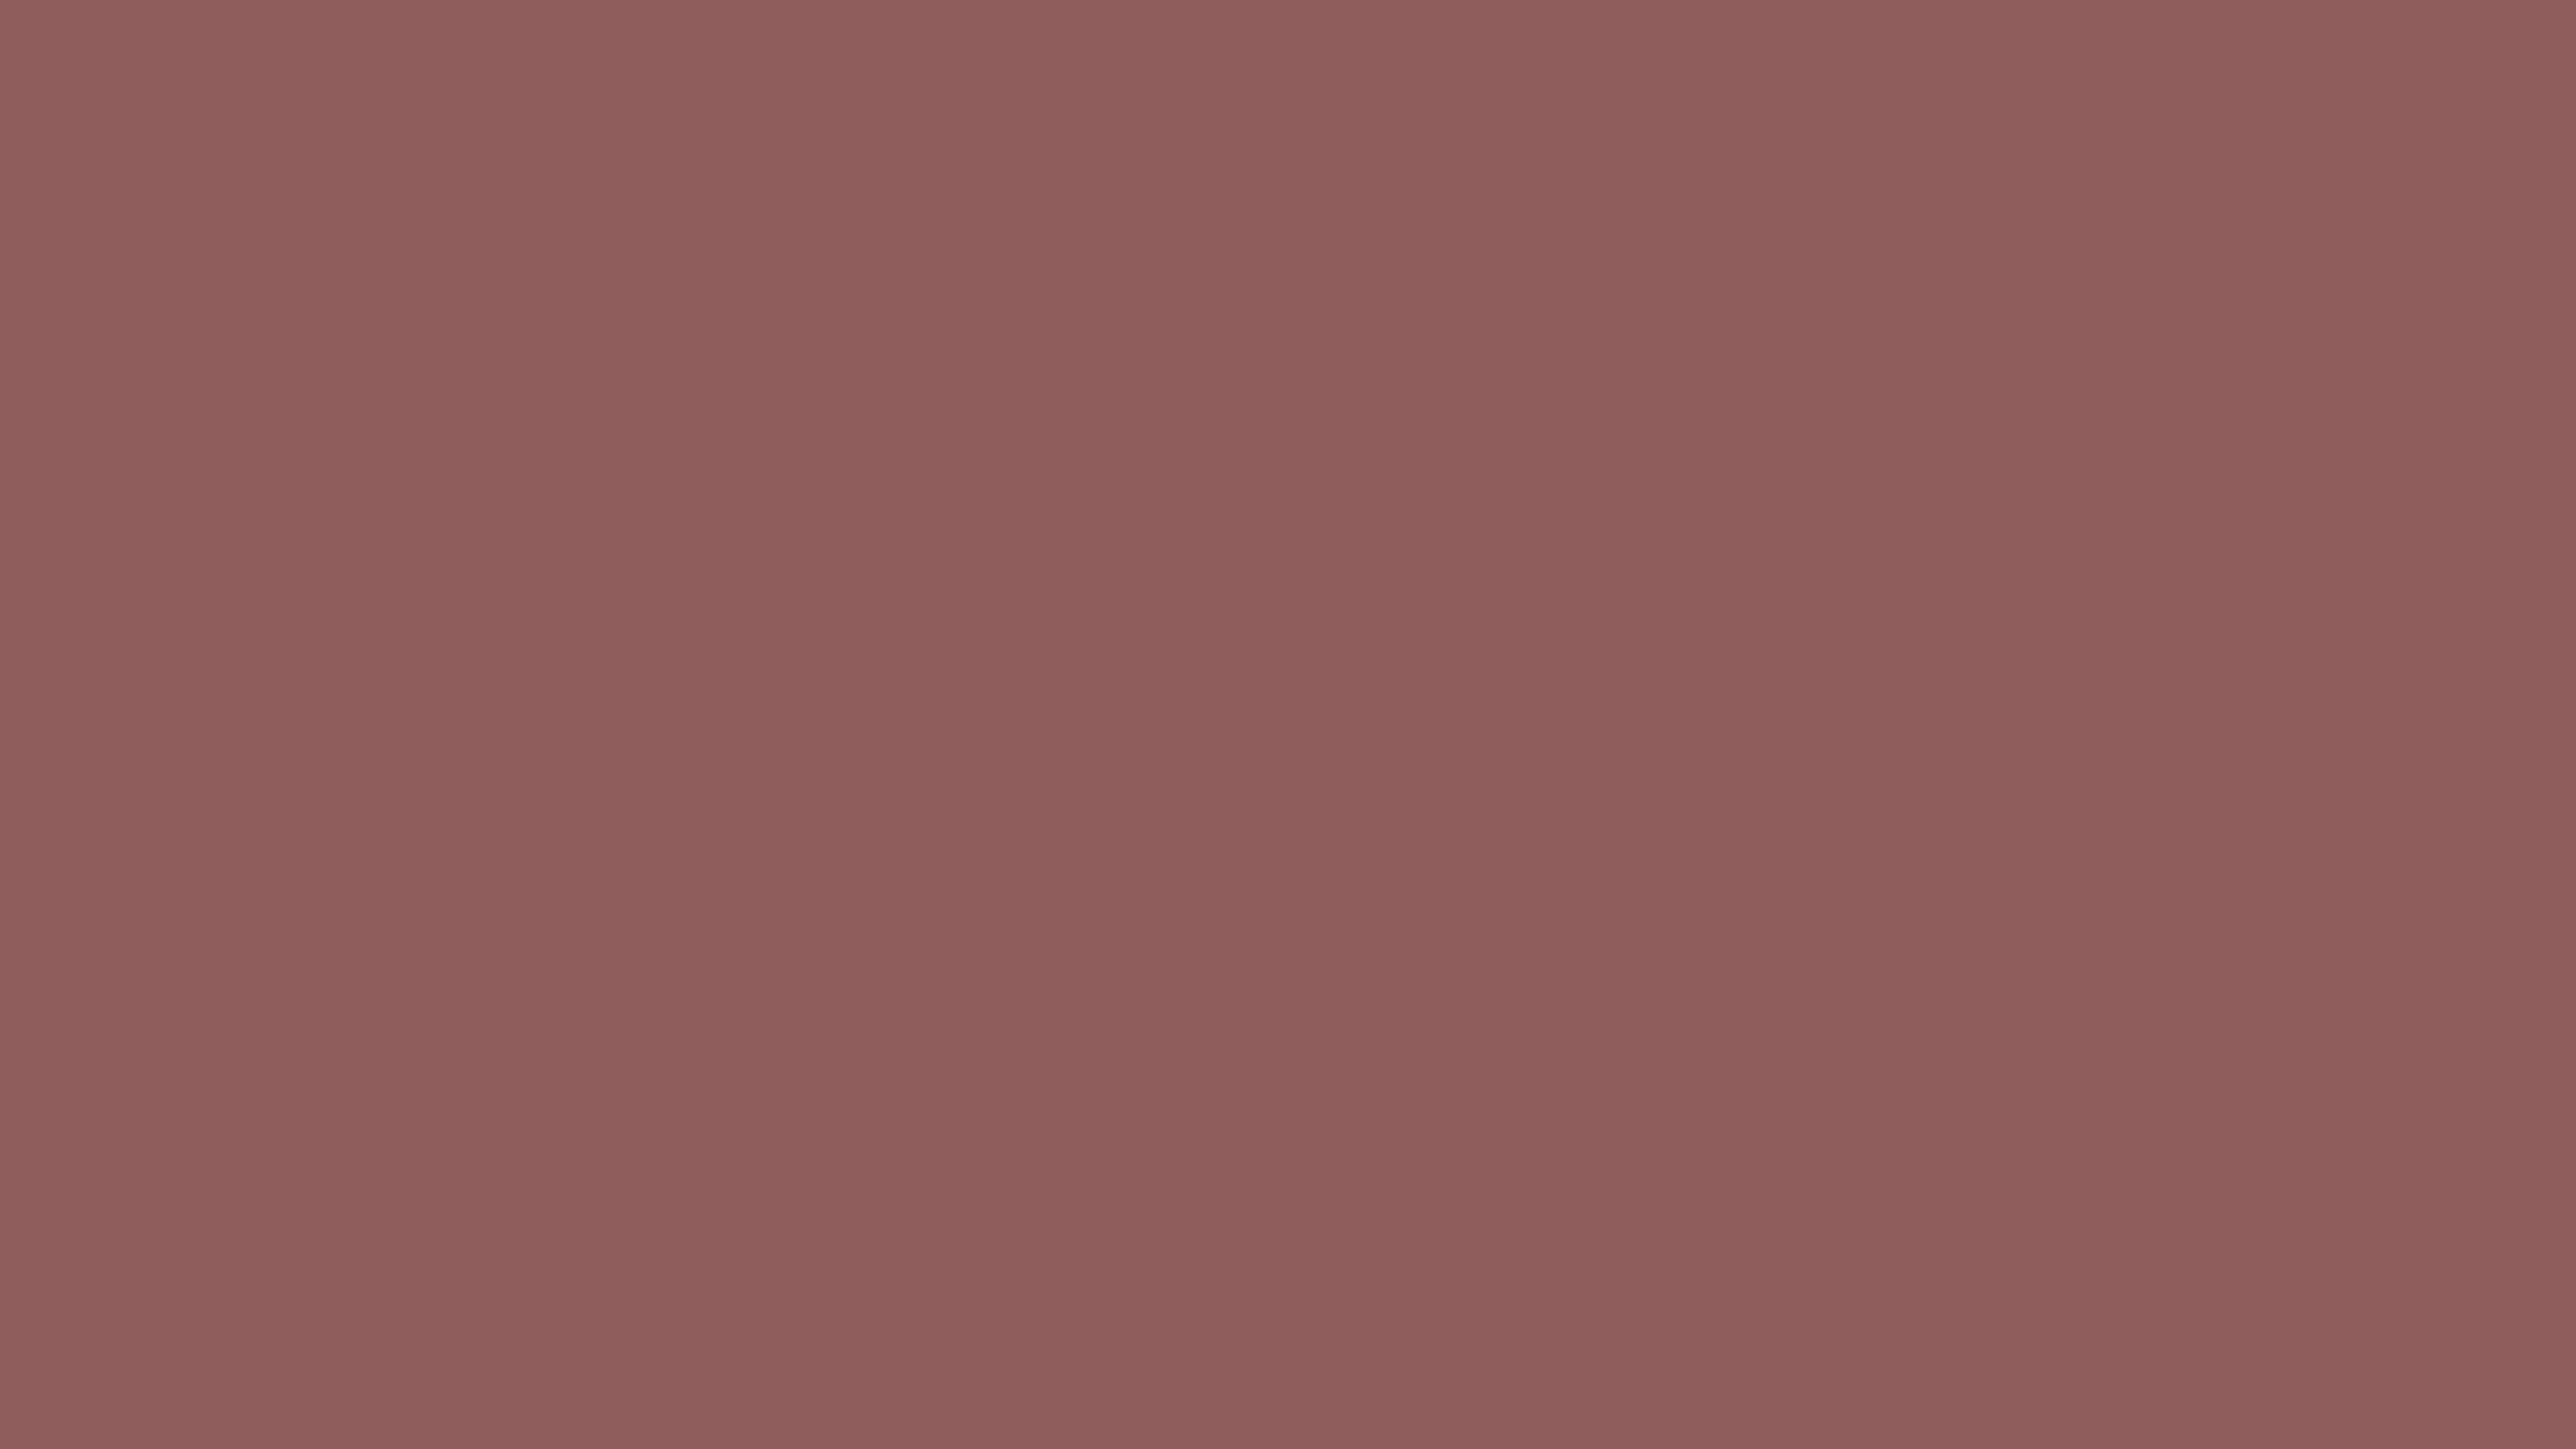 5120x2880 Rose Taupe Solid Color Background